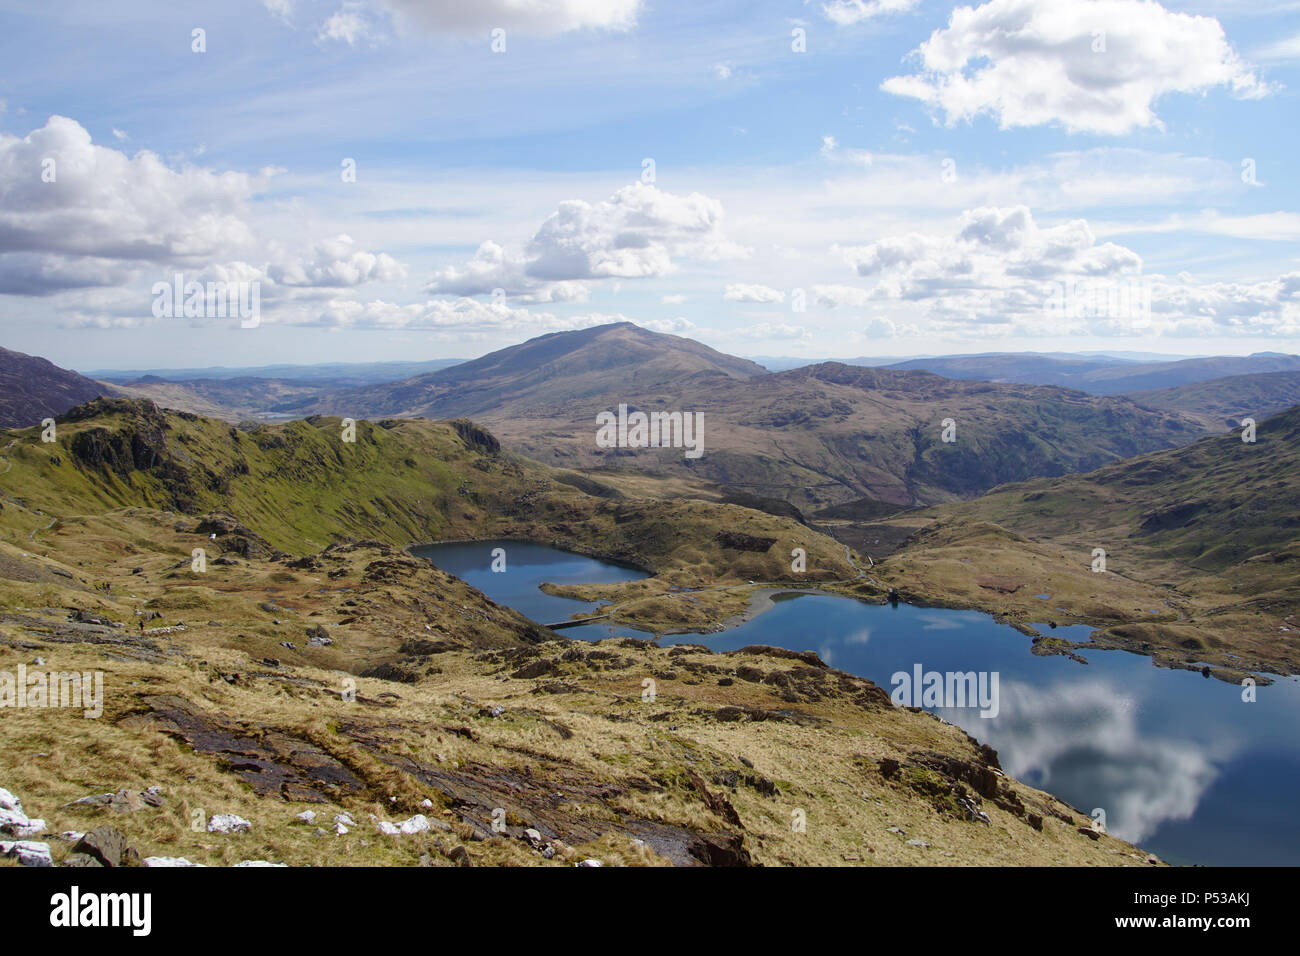 A view in Snowdonia, North Wales, looking across the mountains and lakes from the Pyg Track going up Snowdon. Below is part of the Miners Track. Stock Photo